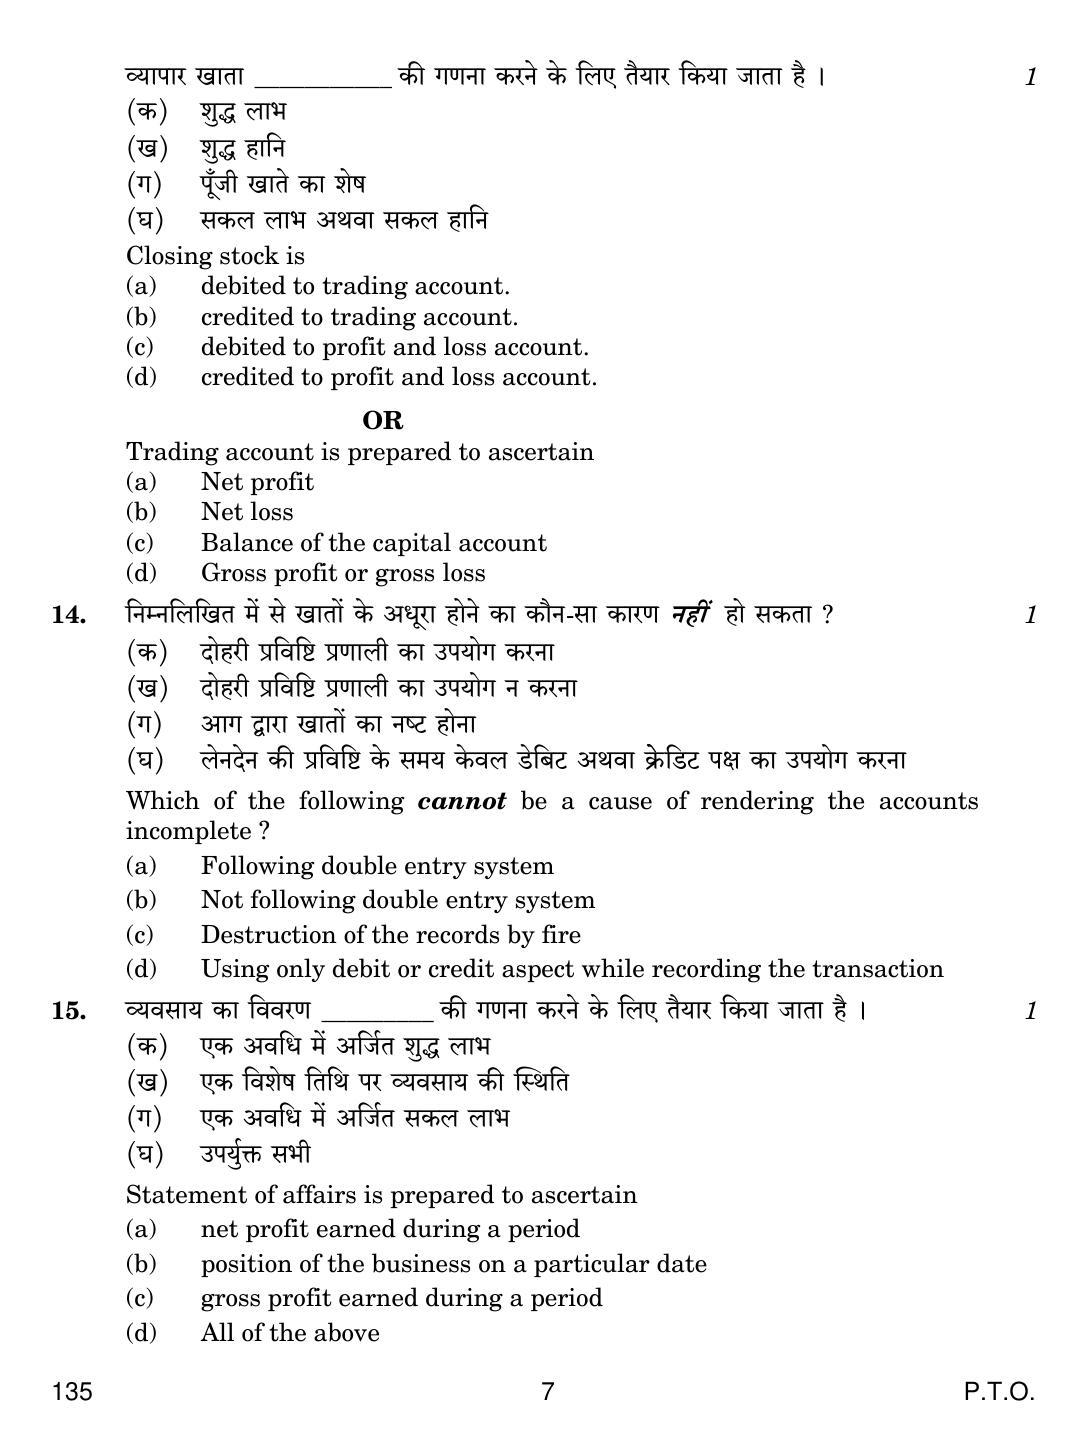 CBSE Class 10 135 ELEMENTS OF BOOK-KEEPING AND ACCOUNTANCY (COMMERCE) 2019 Question Paper - Page 7